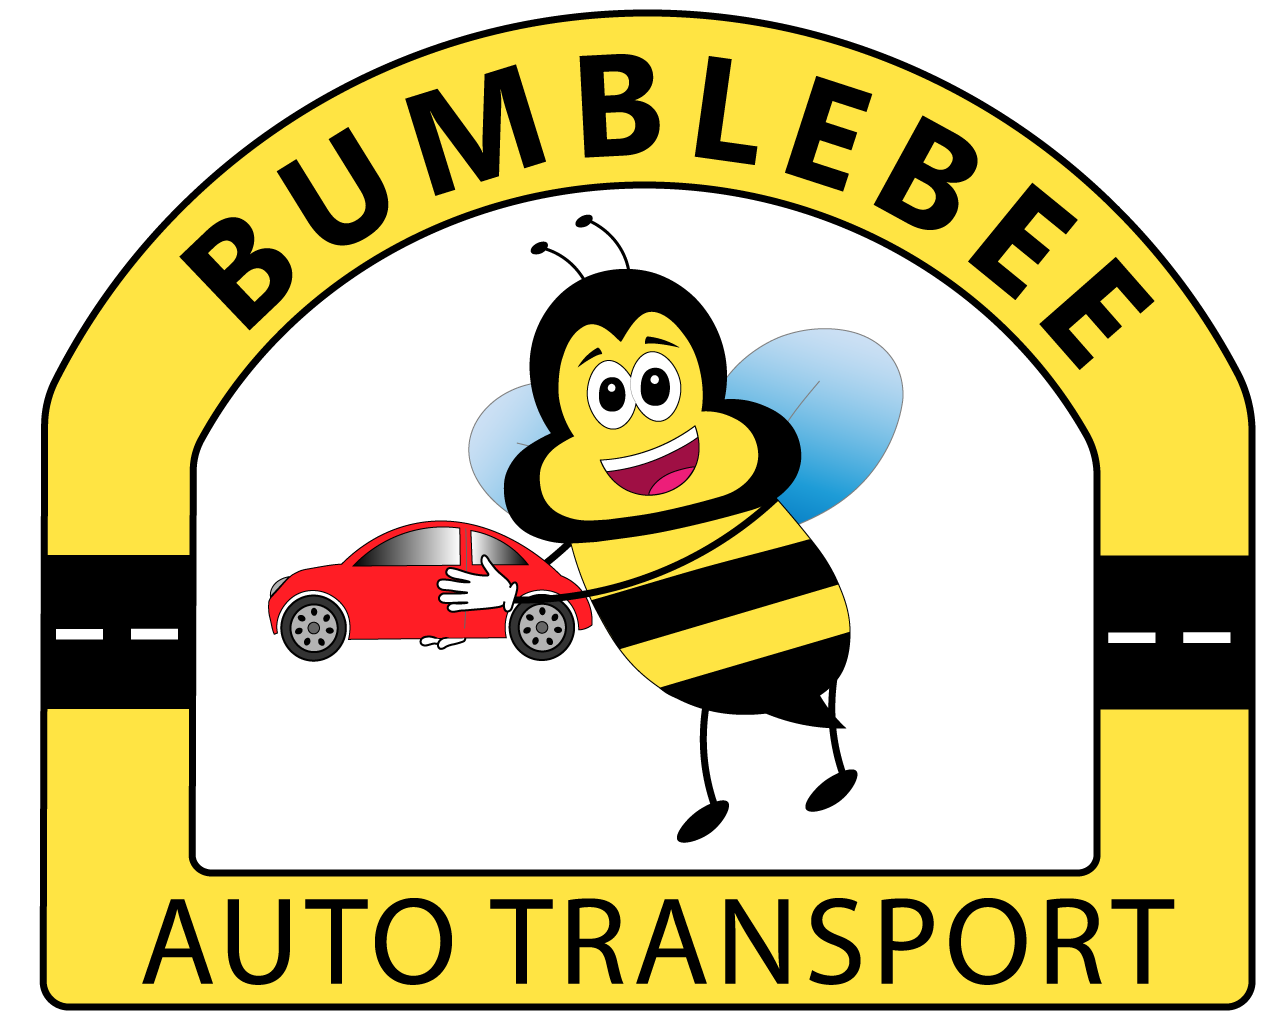 Bumble Bee Auto Transport